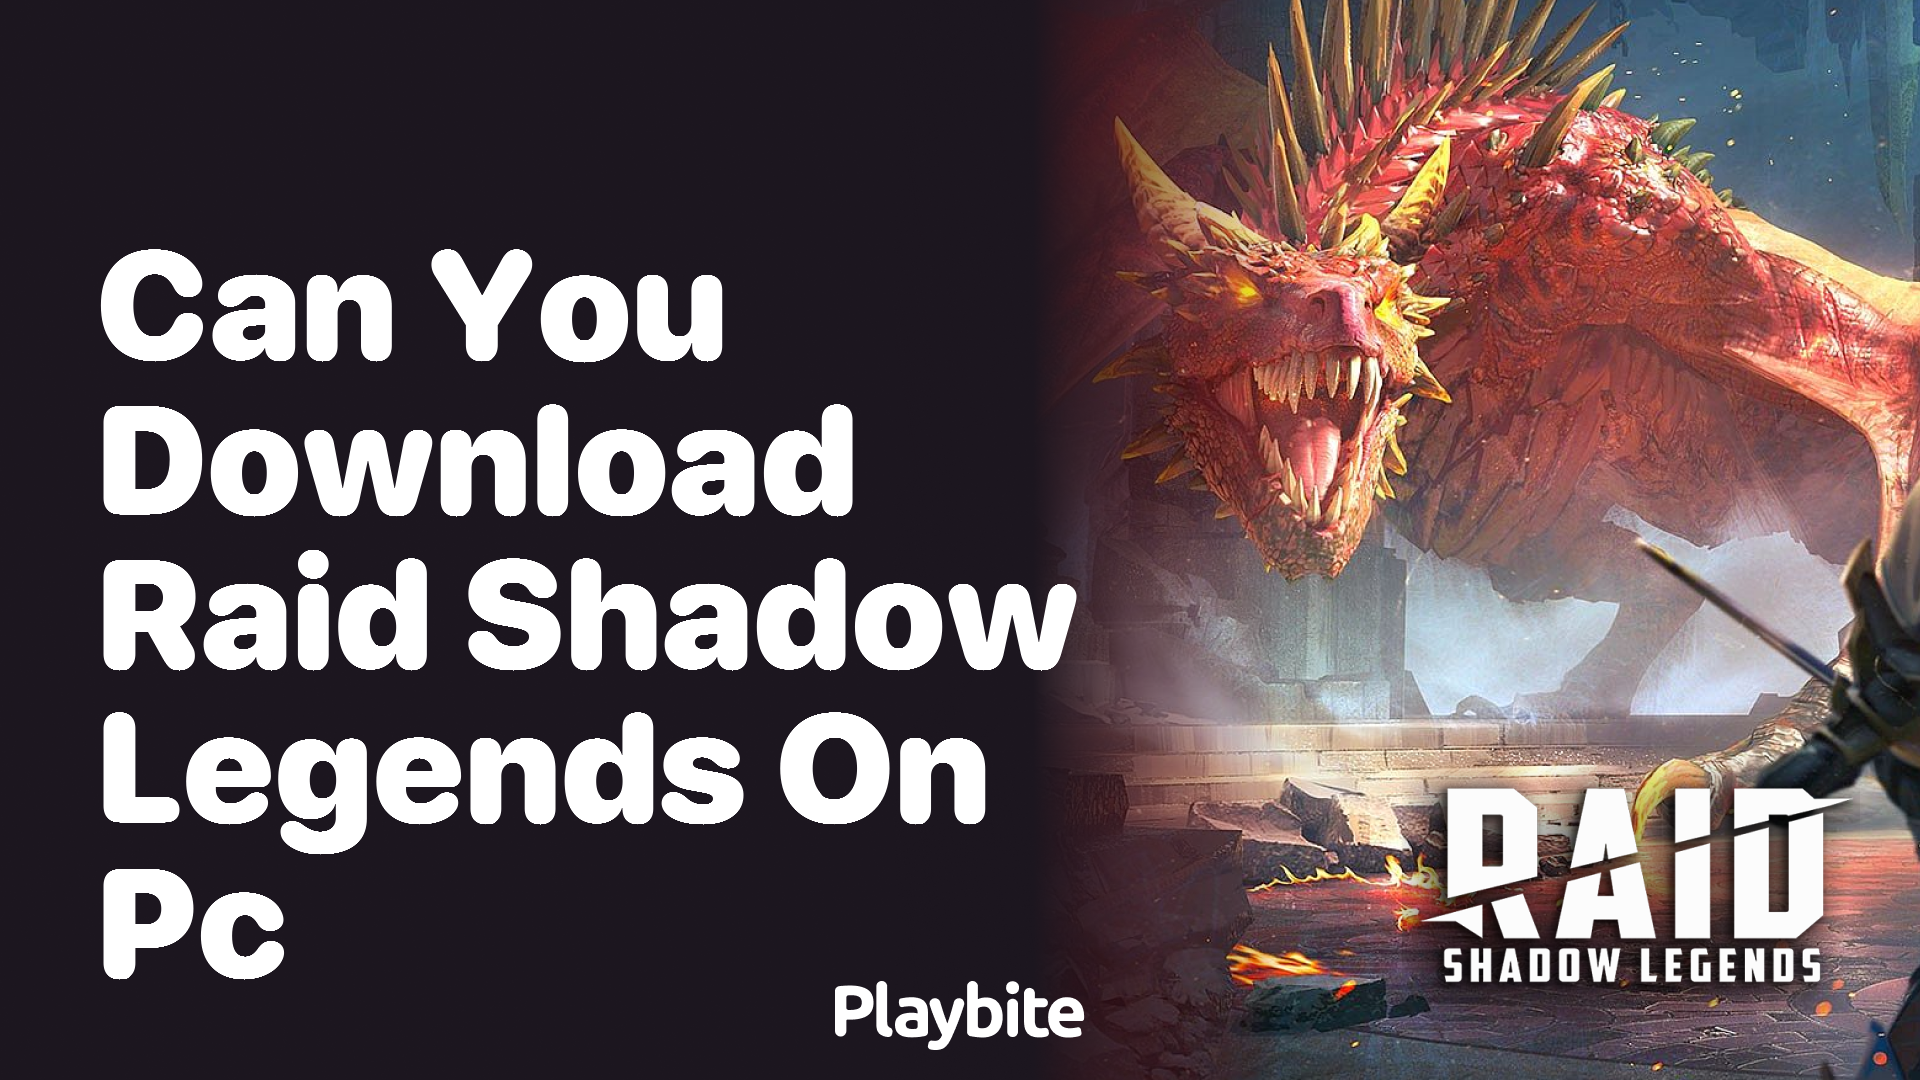 Can You Download Raid Shadow Legends on PC?